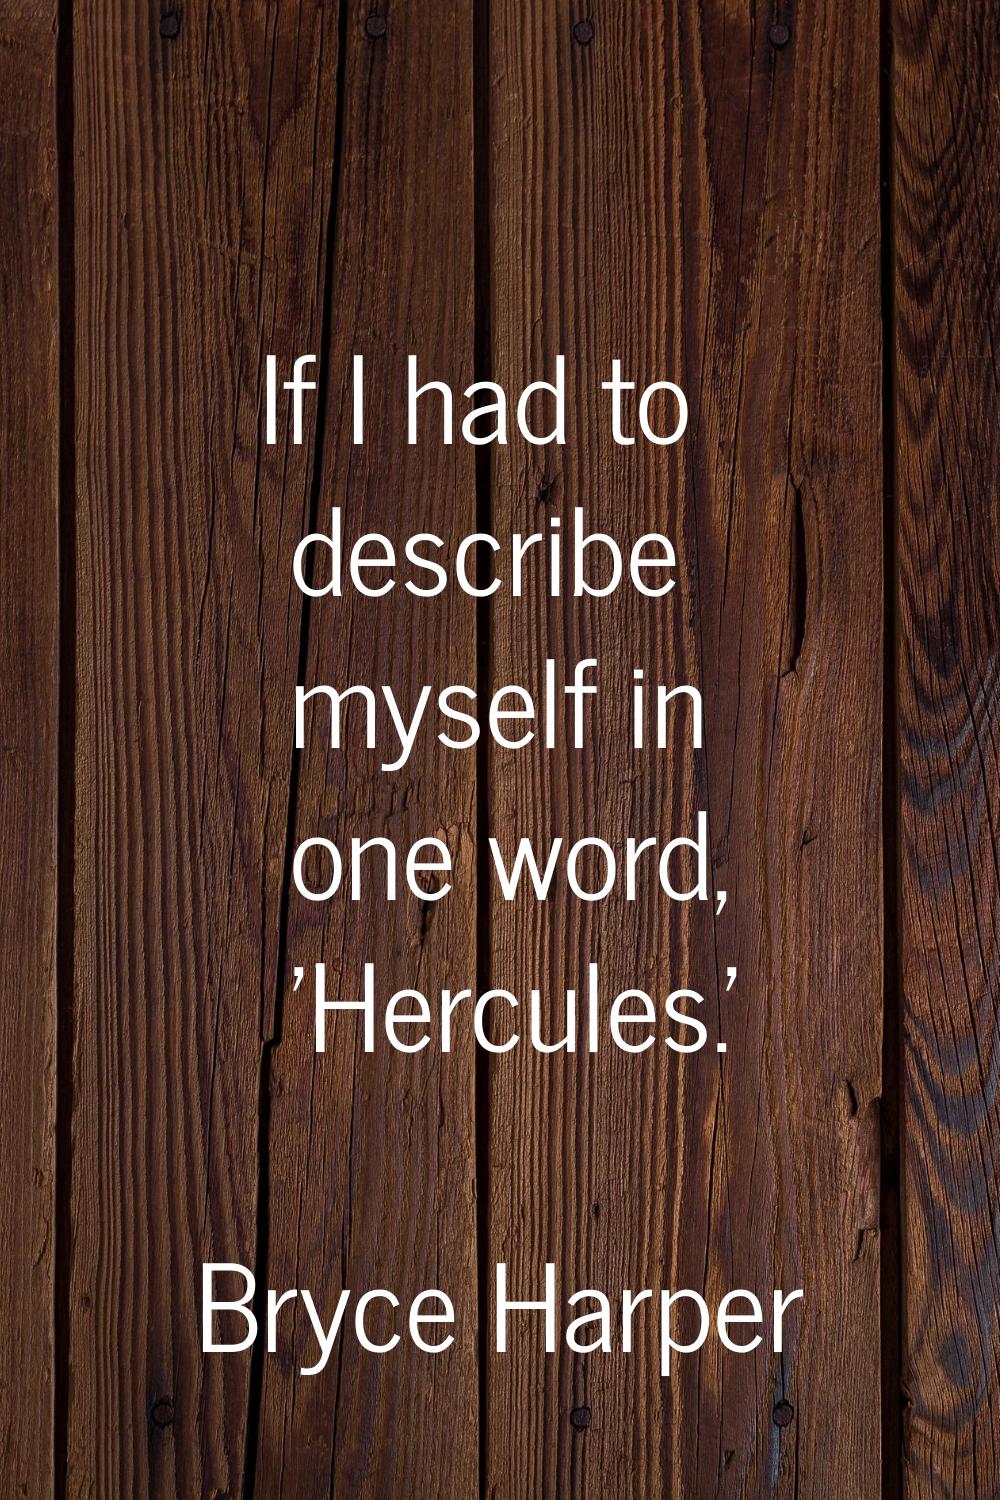 If I had to describe myself in one word, 'Hercules.'